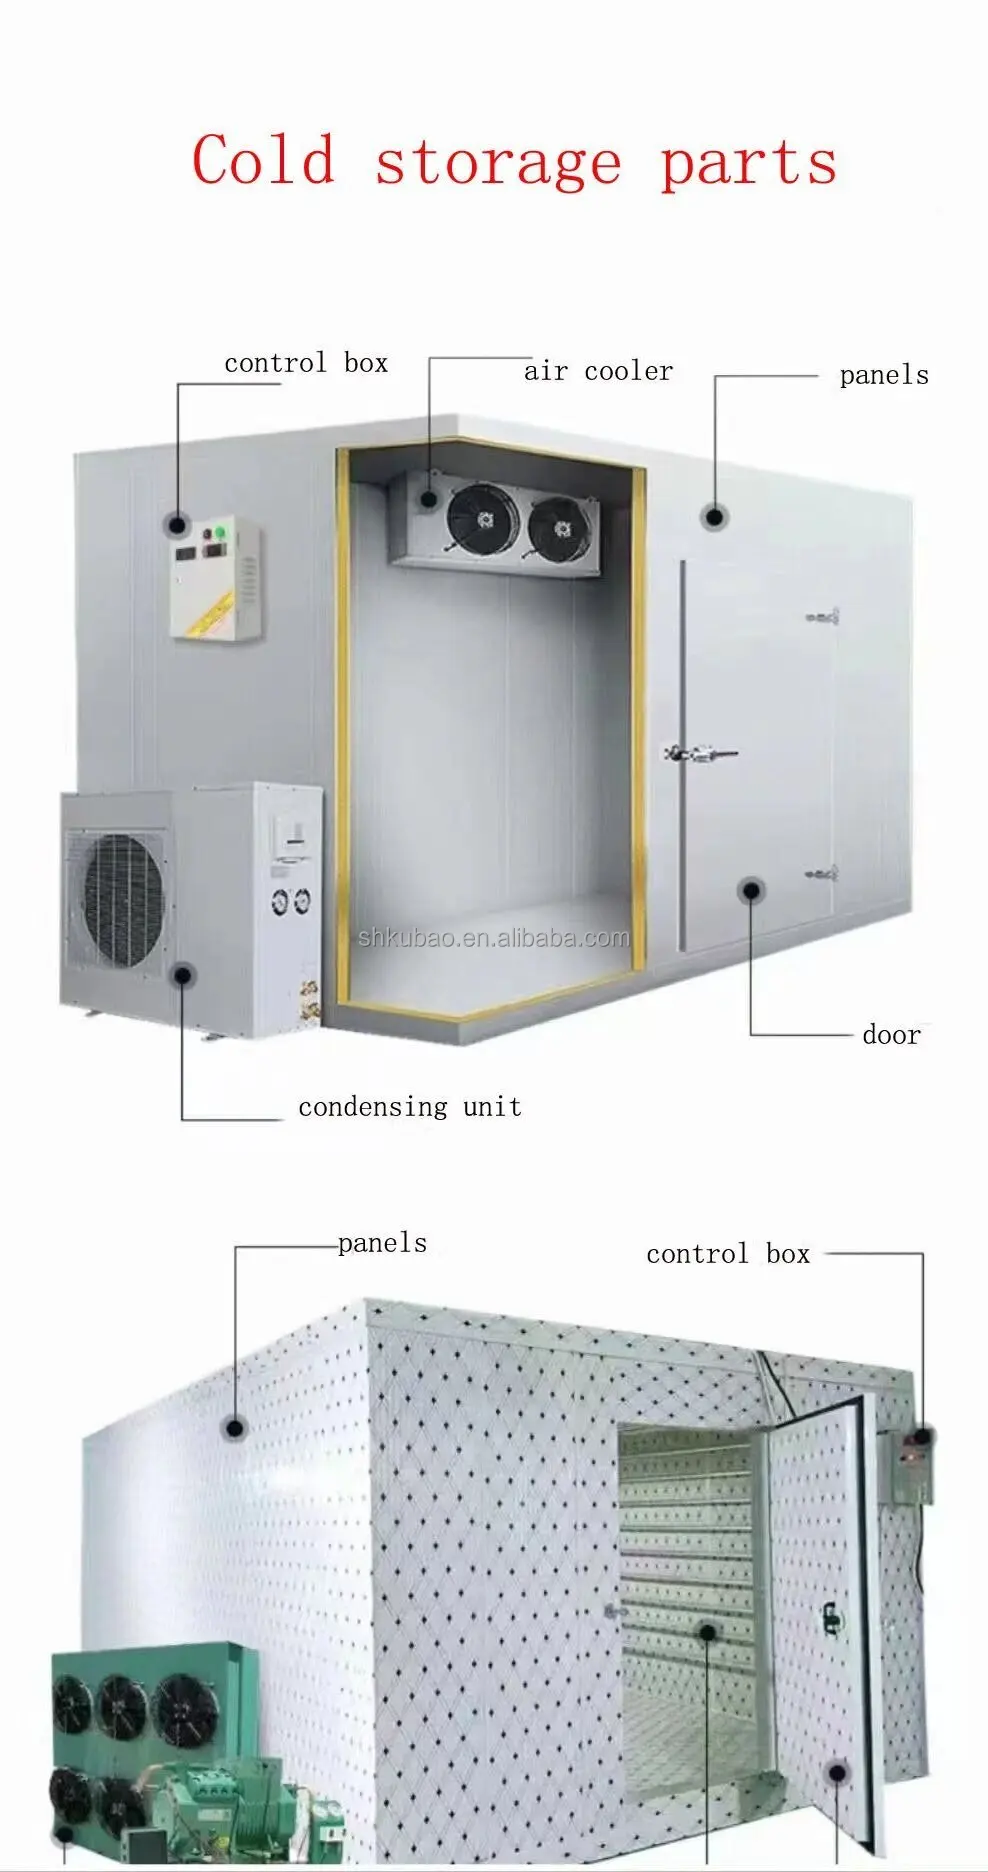 2CES-3Y compressor Box type Air cooled 3HP condensing unit fan grille and blades stainless steel condensing unit price